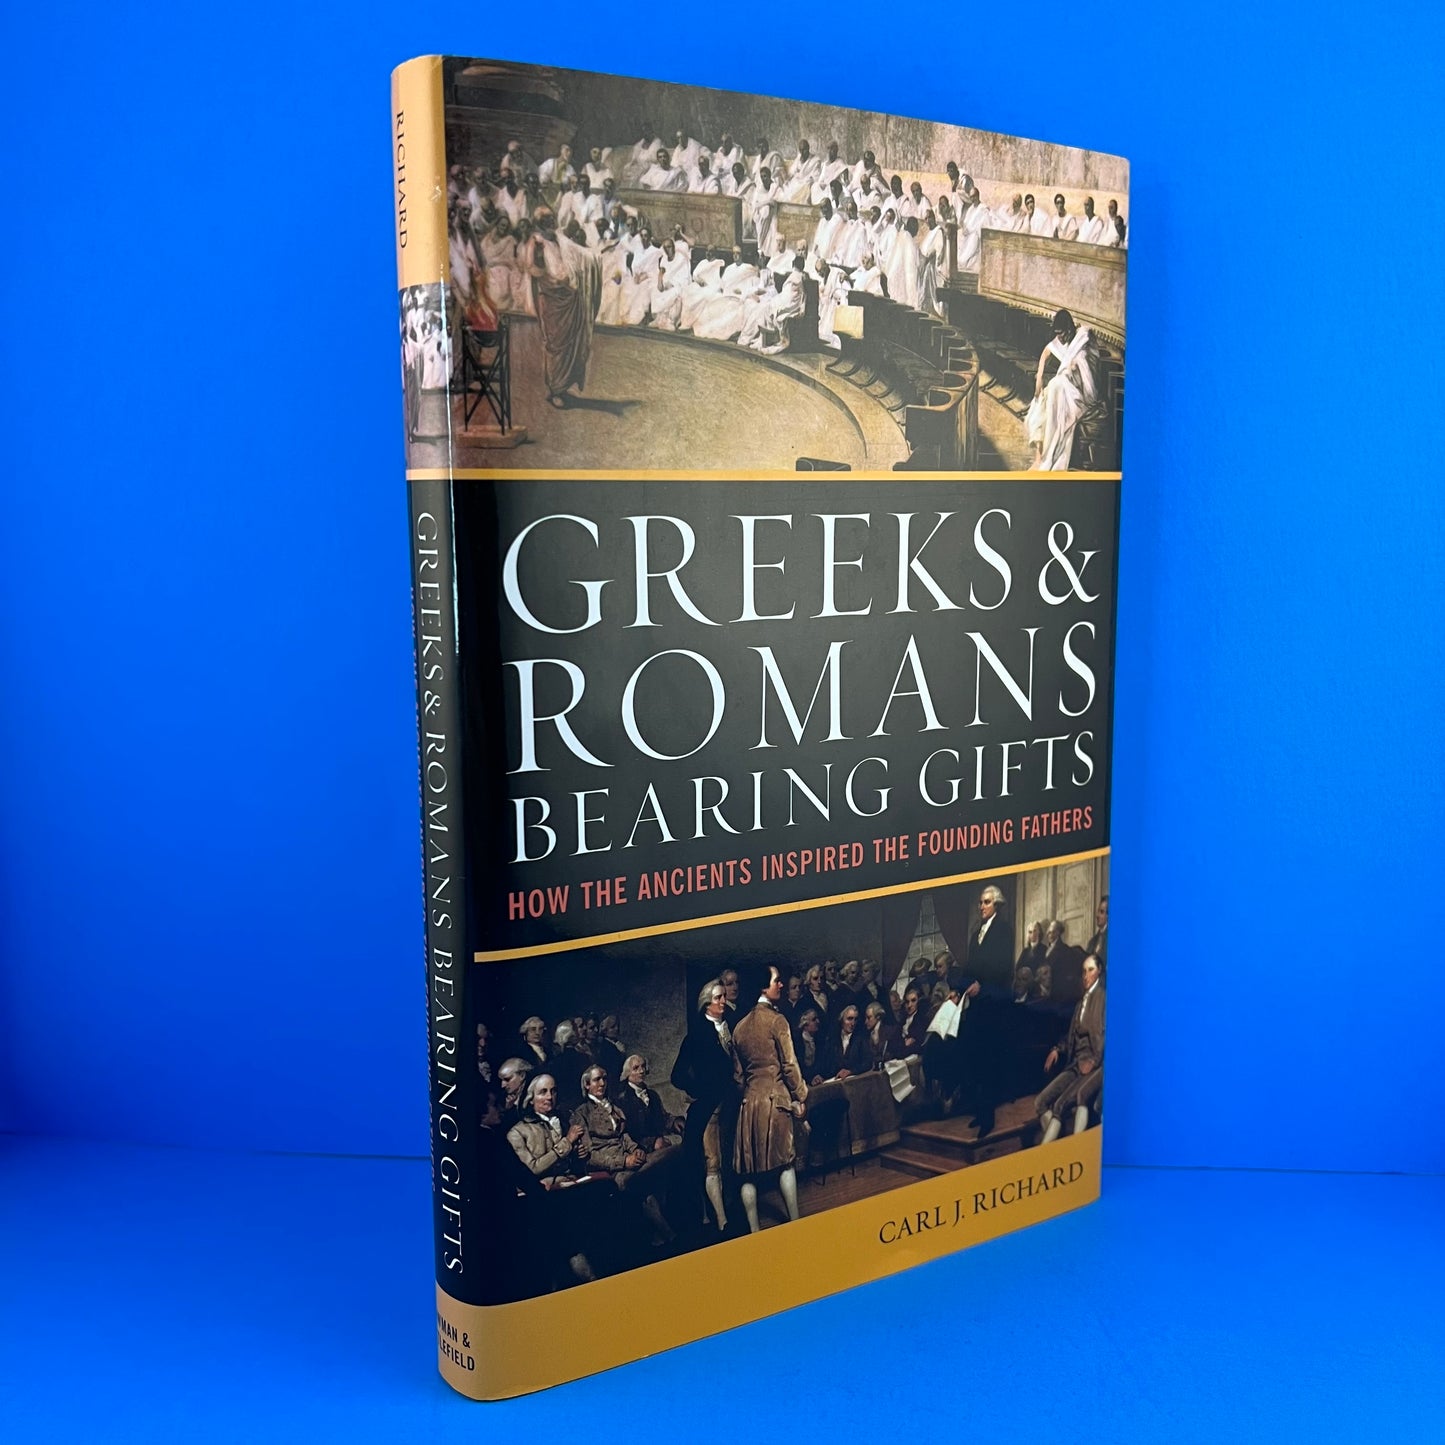 Greeks & Romans Bearing Gifts: How the Ancients Inspired the Founding Fathers